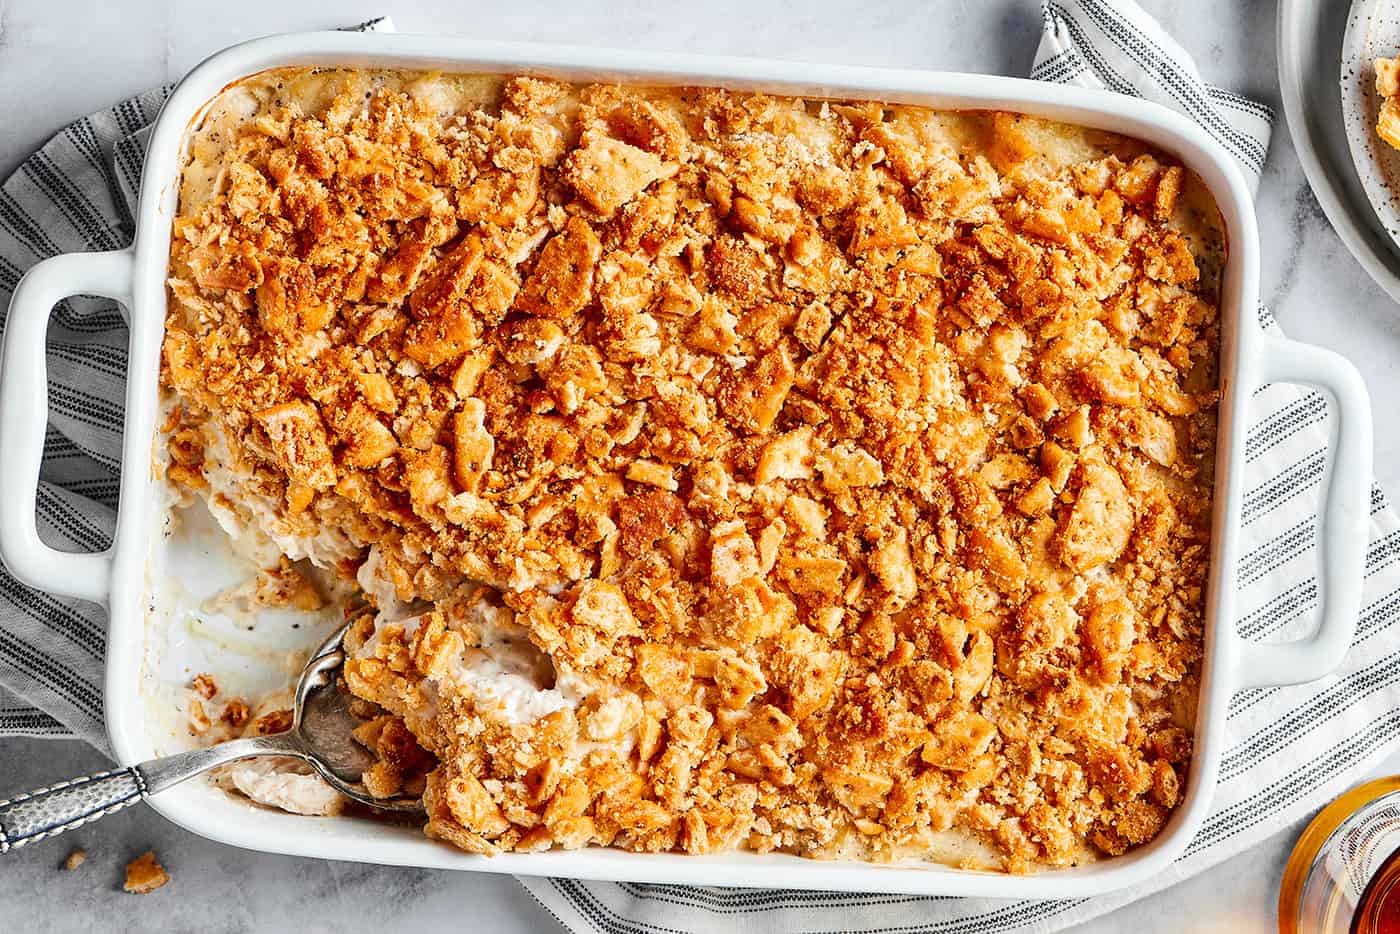 poppy seed chicken casserole baked in a white rectangular dish, with a spoon in it